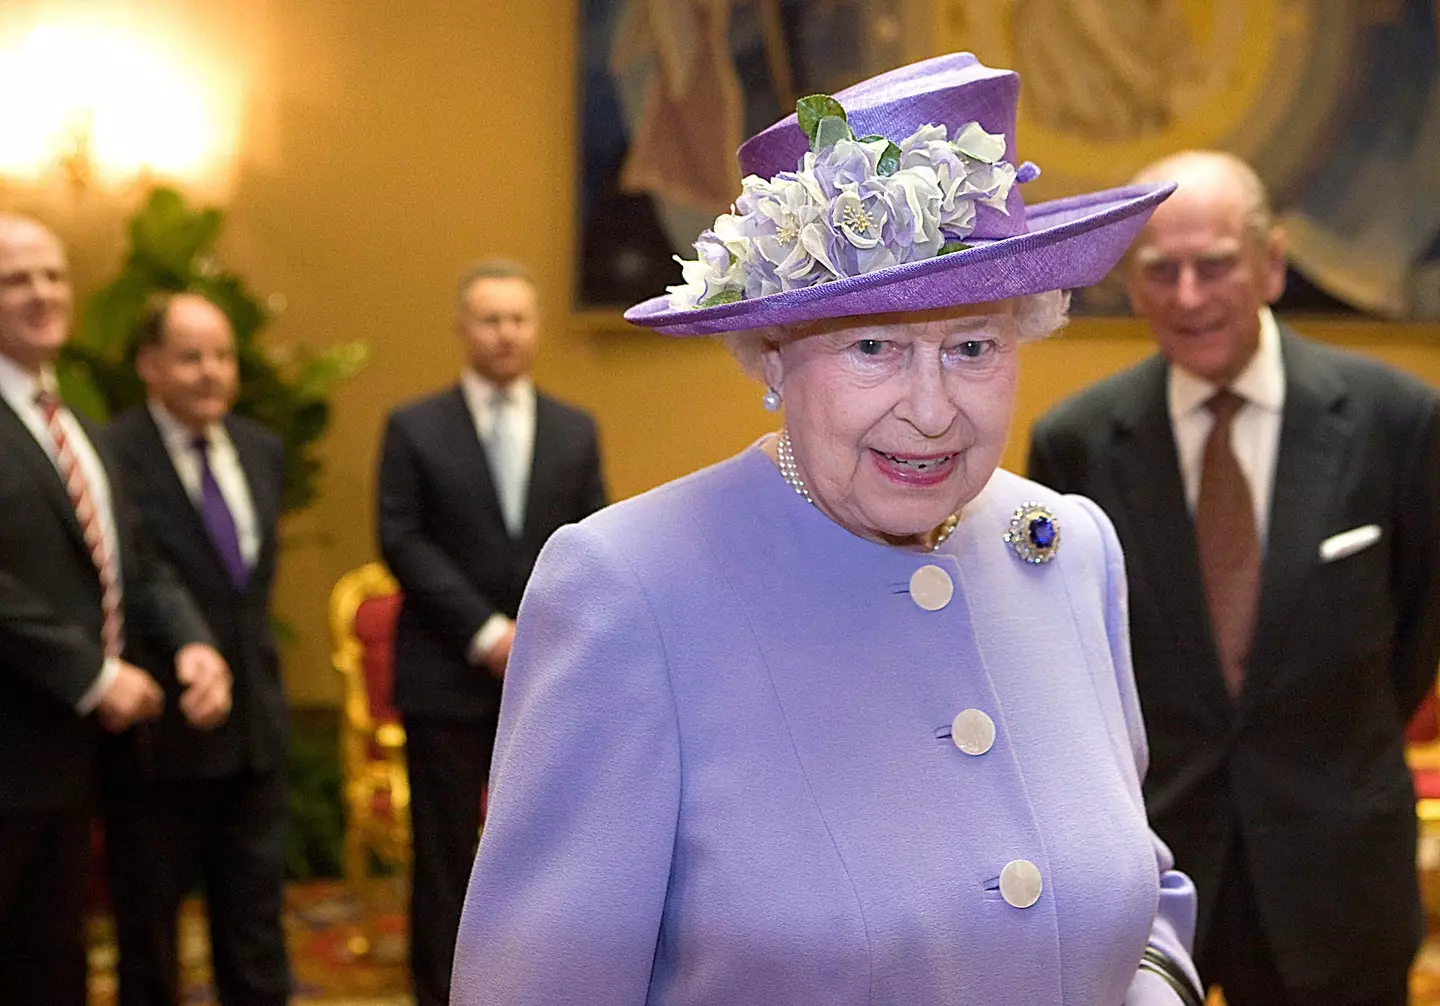 Queen Elizabeth II passed away in September at Balmoral Castle at the age of 96.